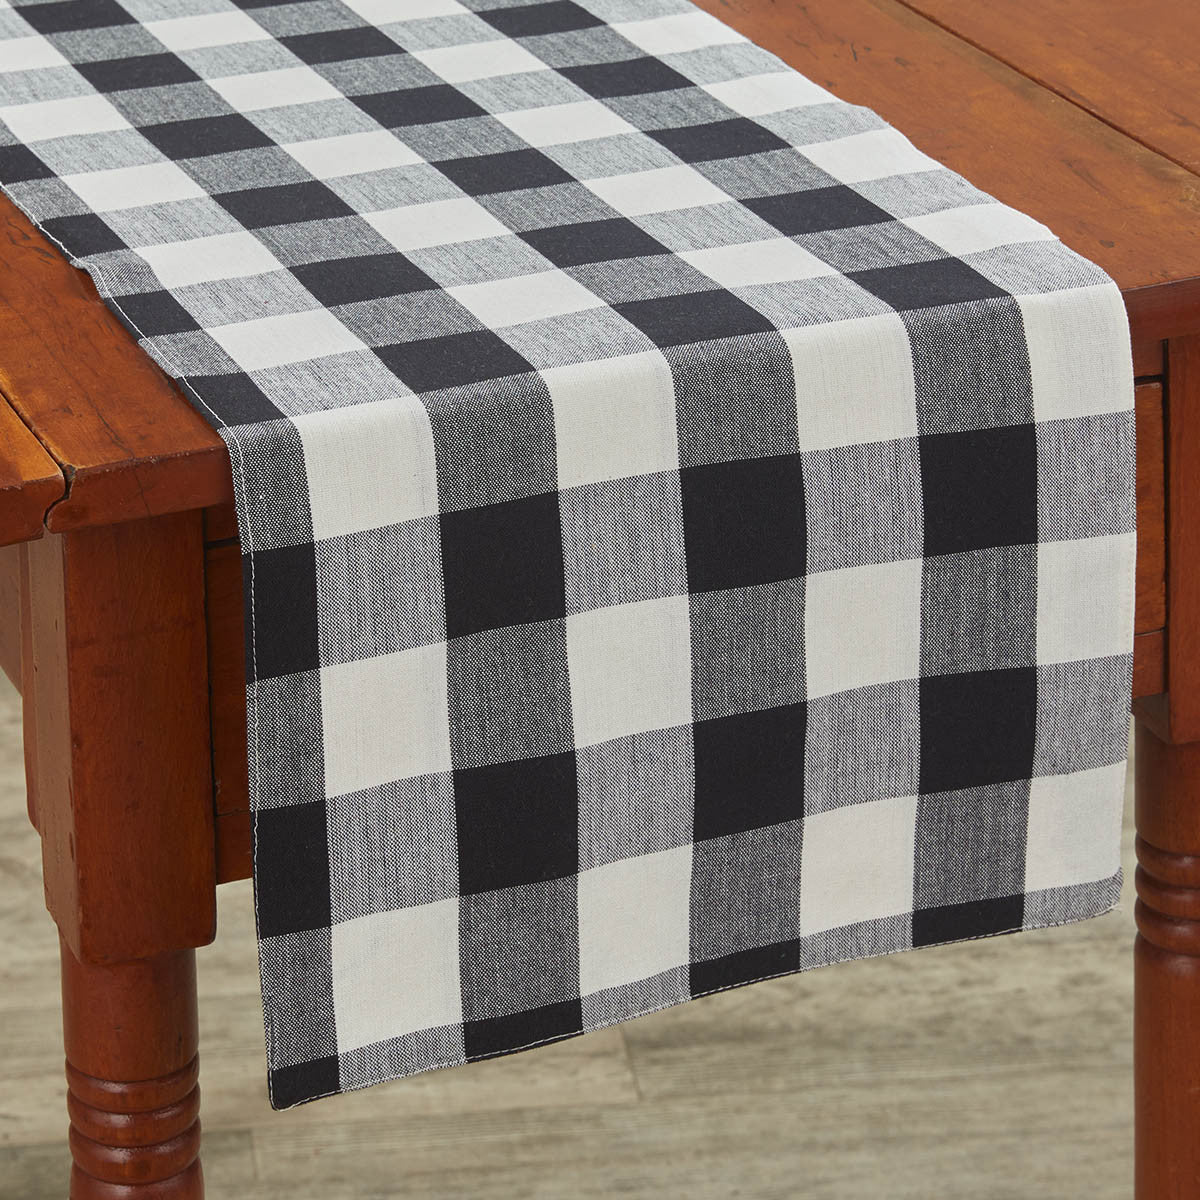 Wicklow Check Backed Table Runner 36"L- Black & Cream Set of 2 Park Designs